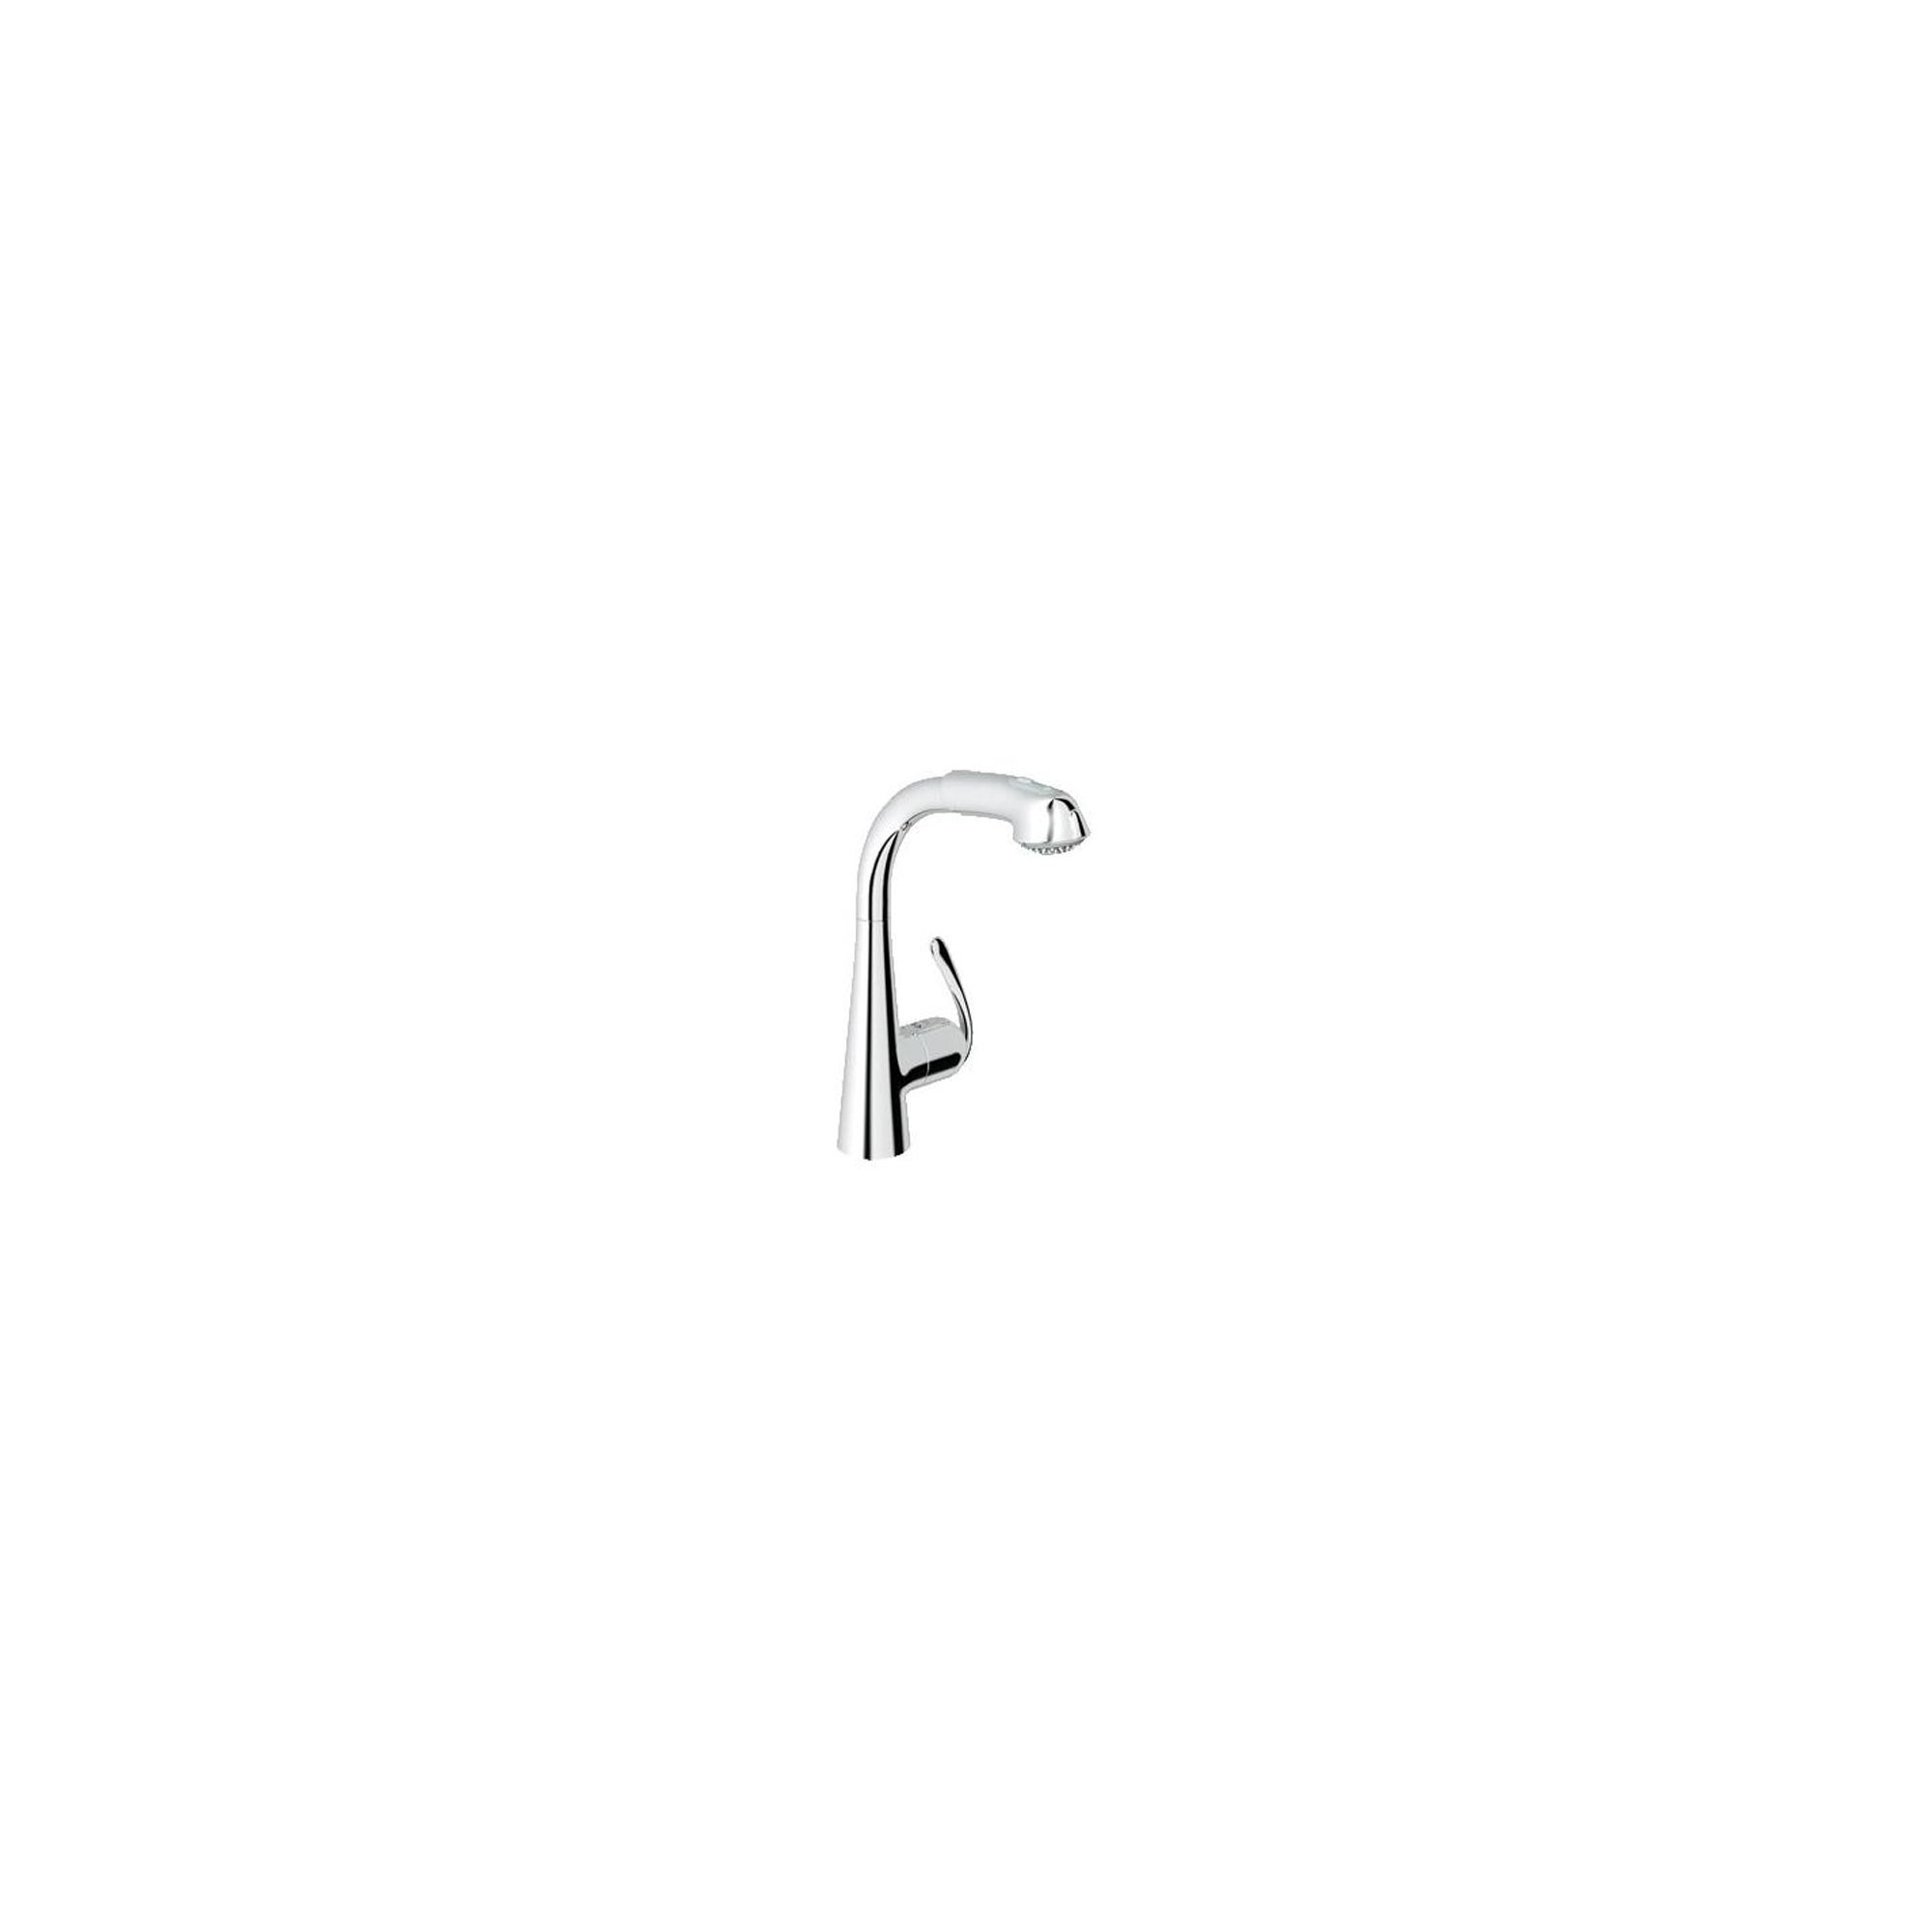 Grohe Zedra Mono Sink Mixer Tap, Pull-Out Spray, Single Handle, Chrome at Tescos Direct